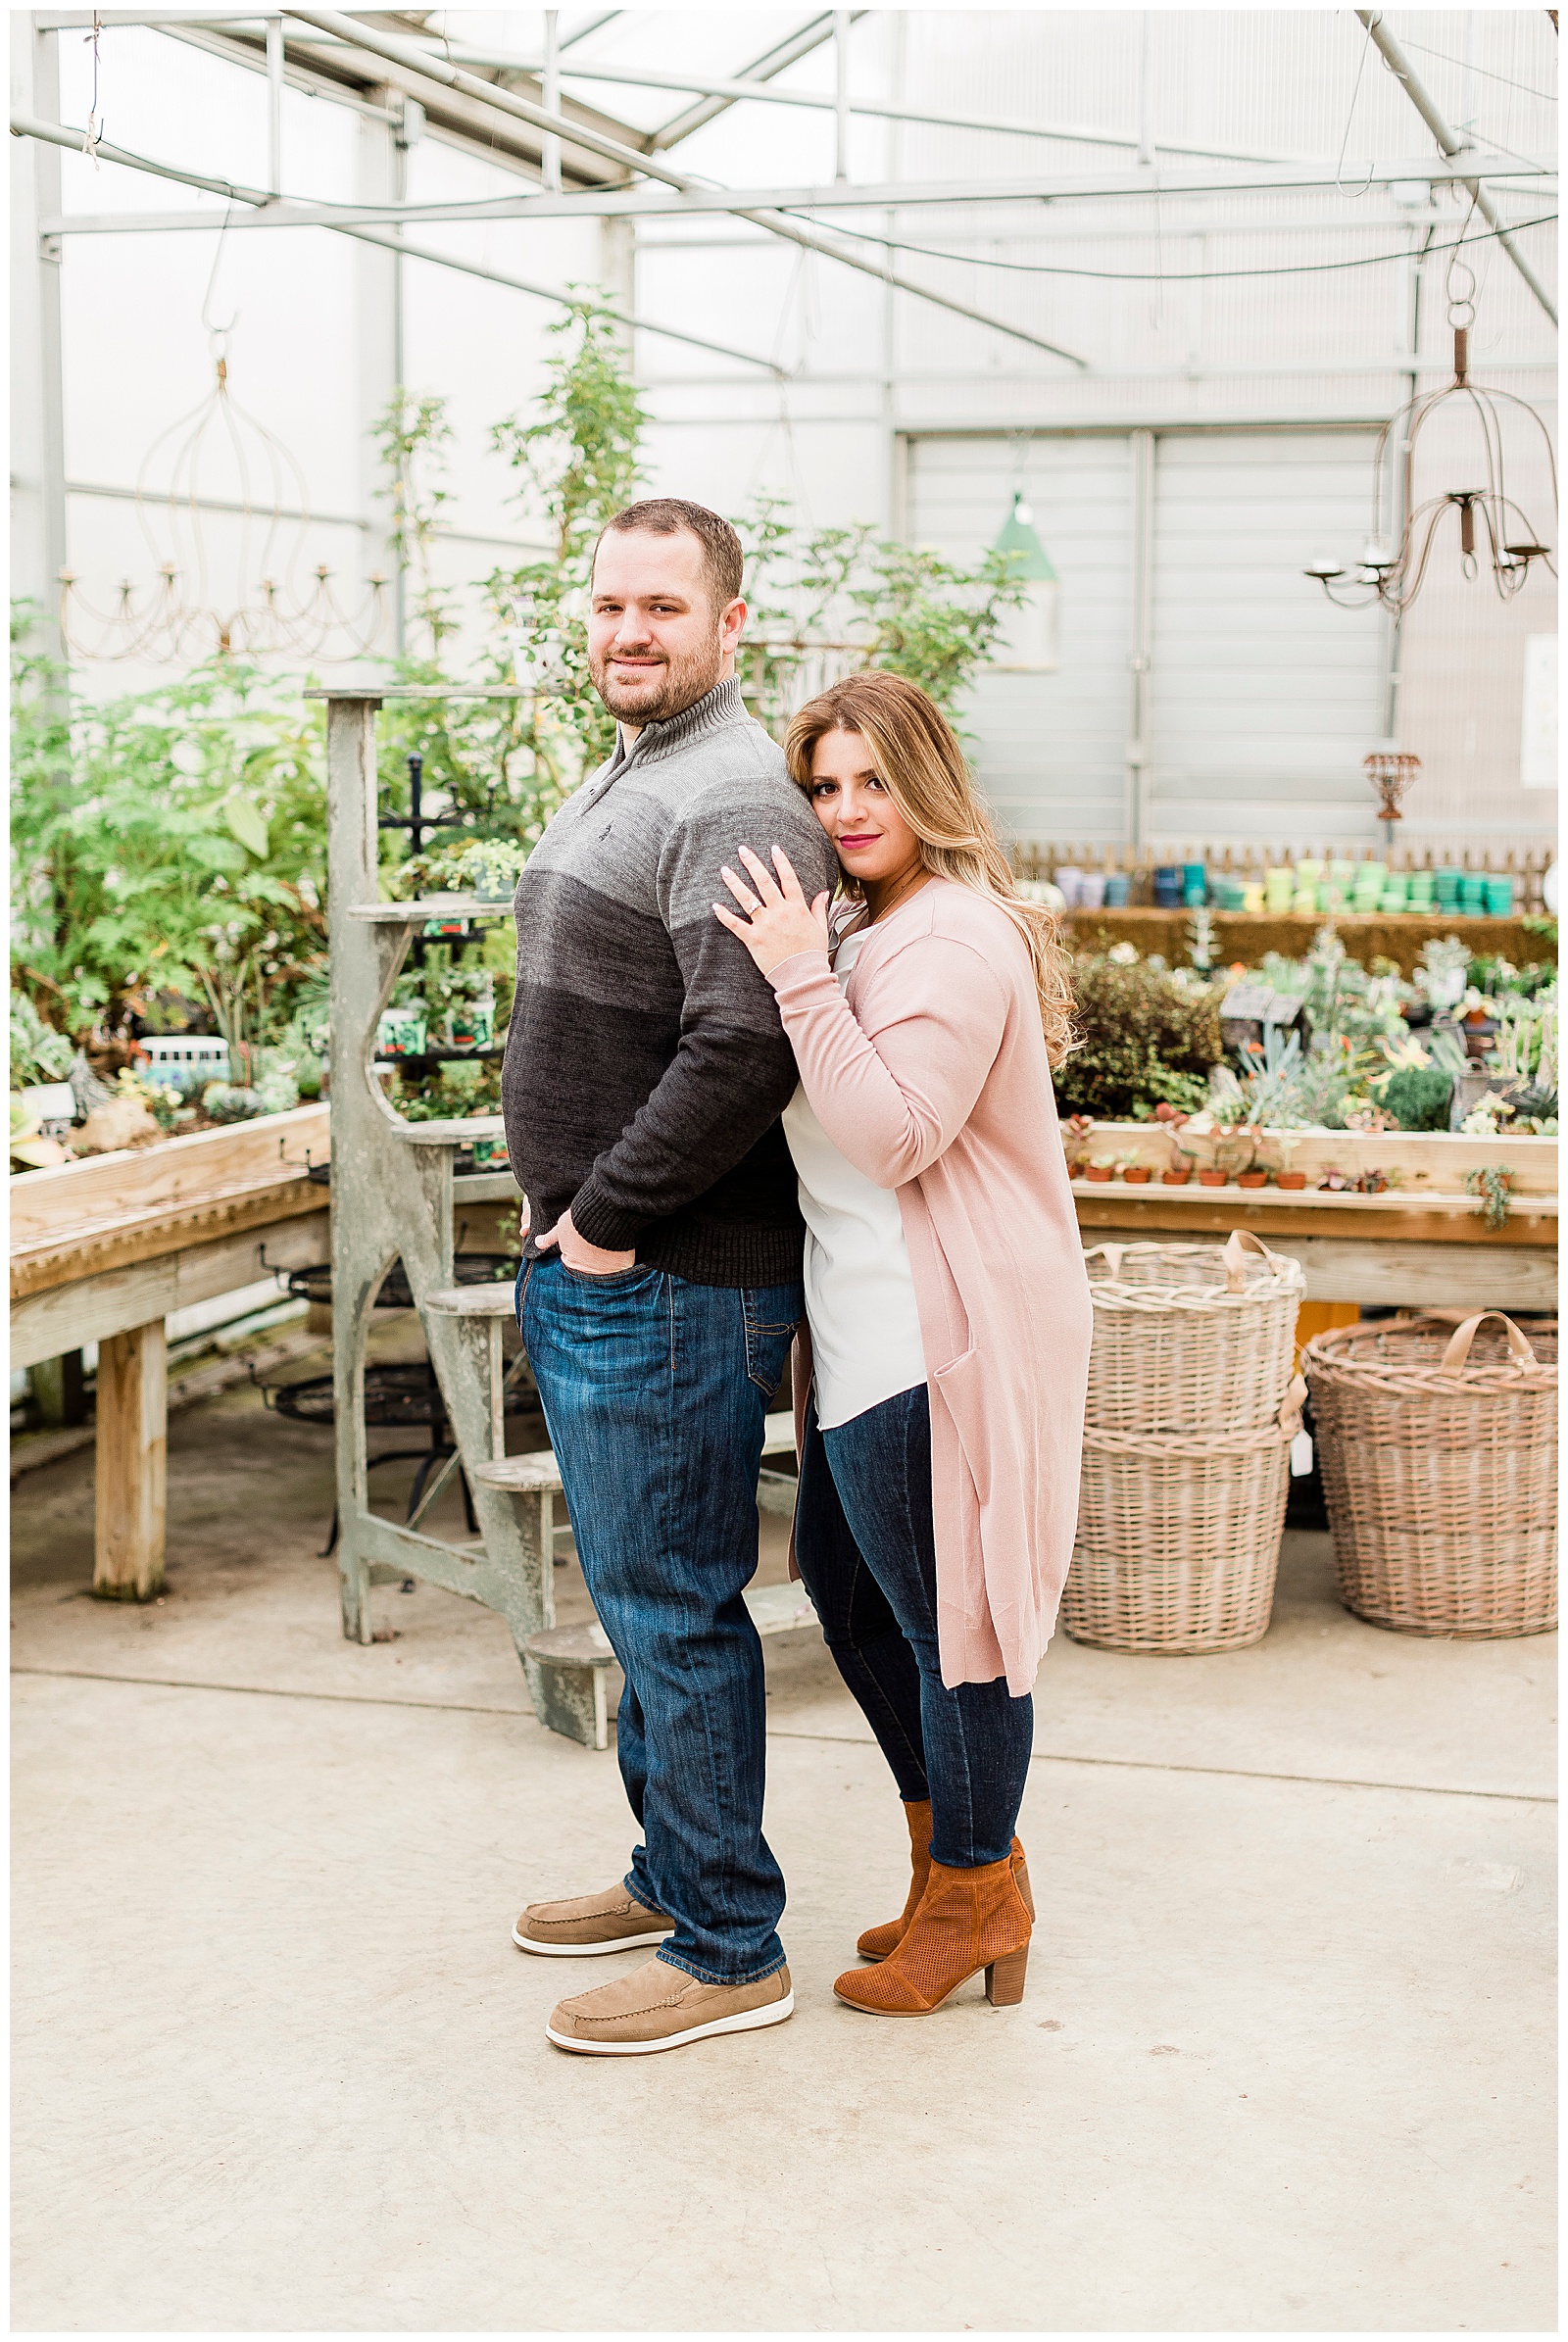 Engagement Photos in Greenhouses